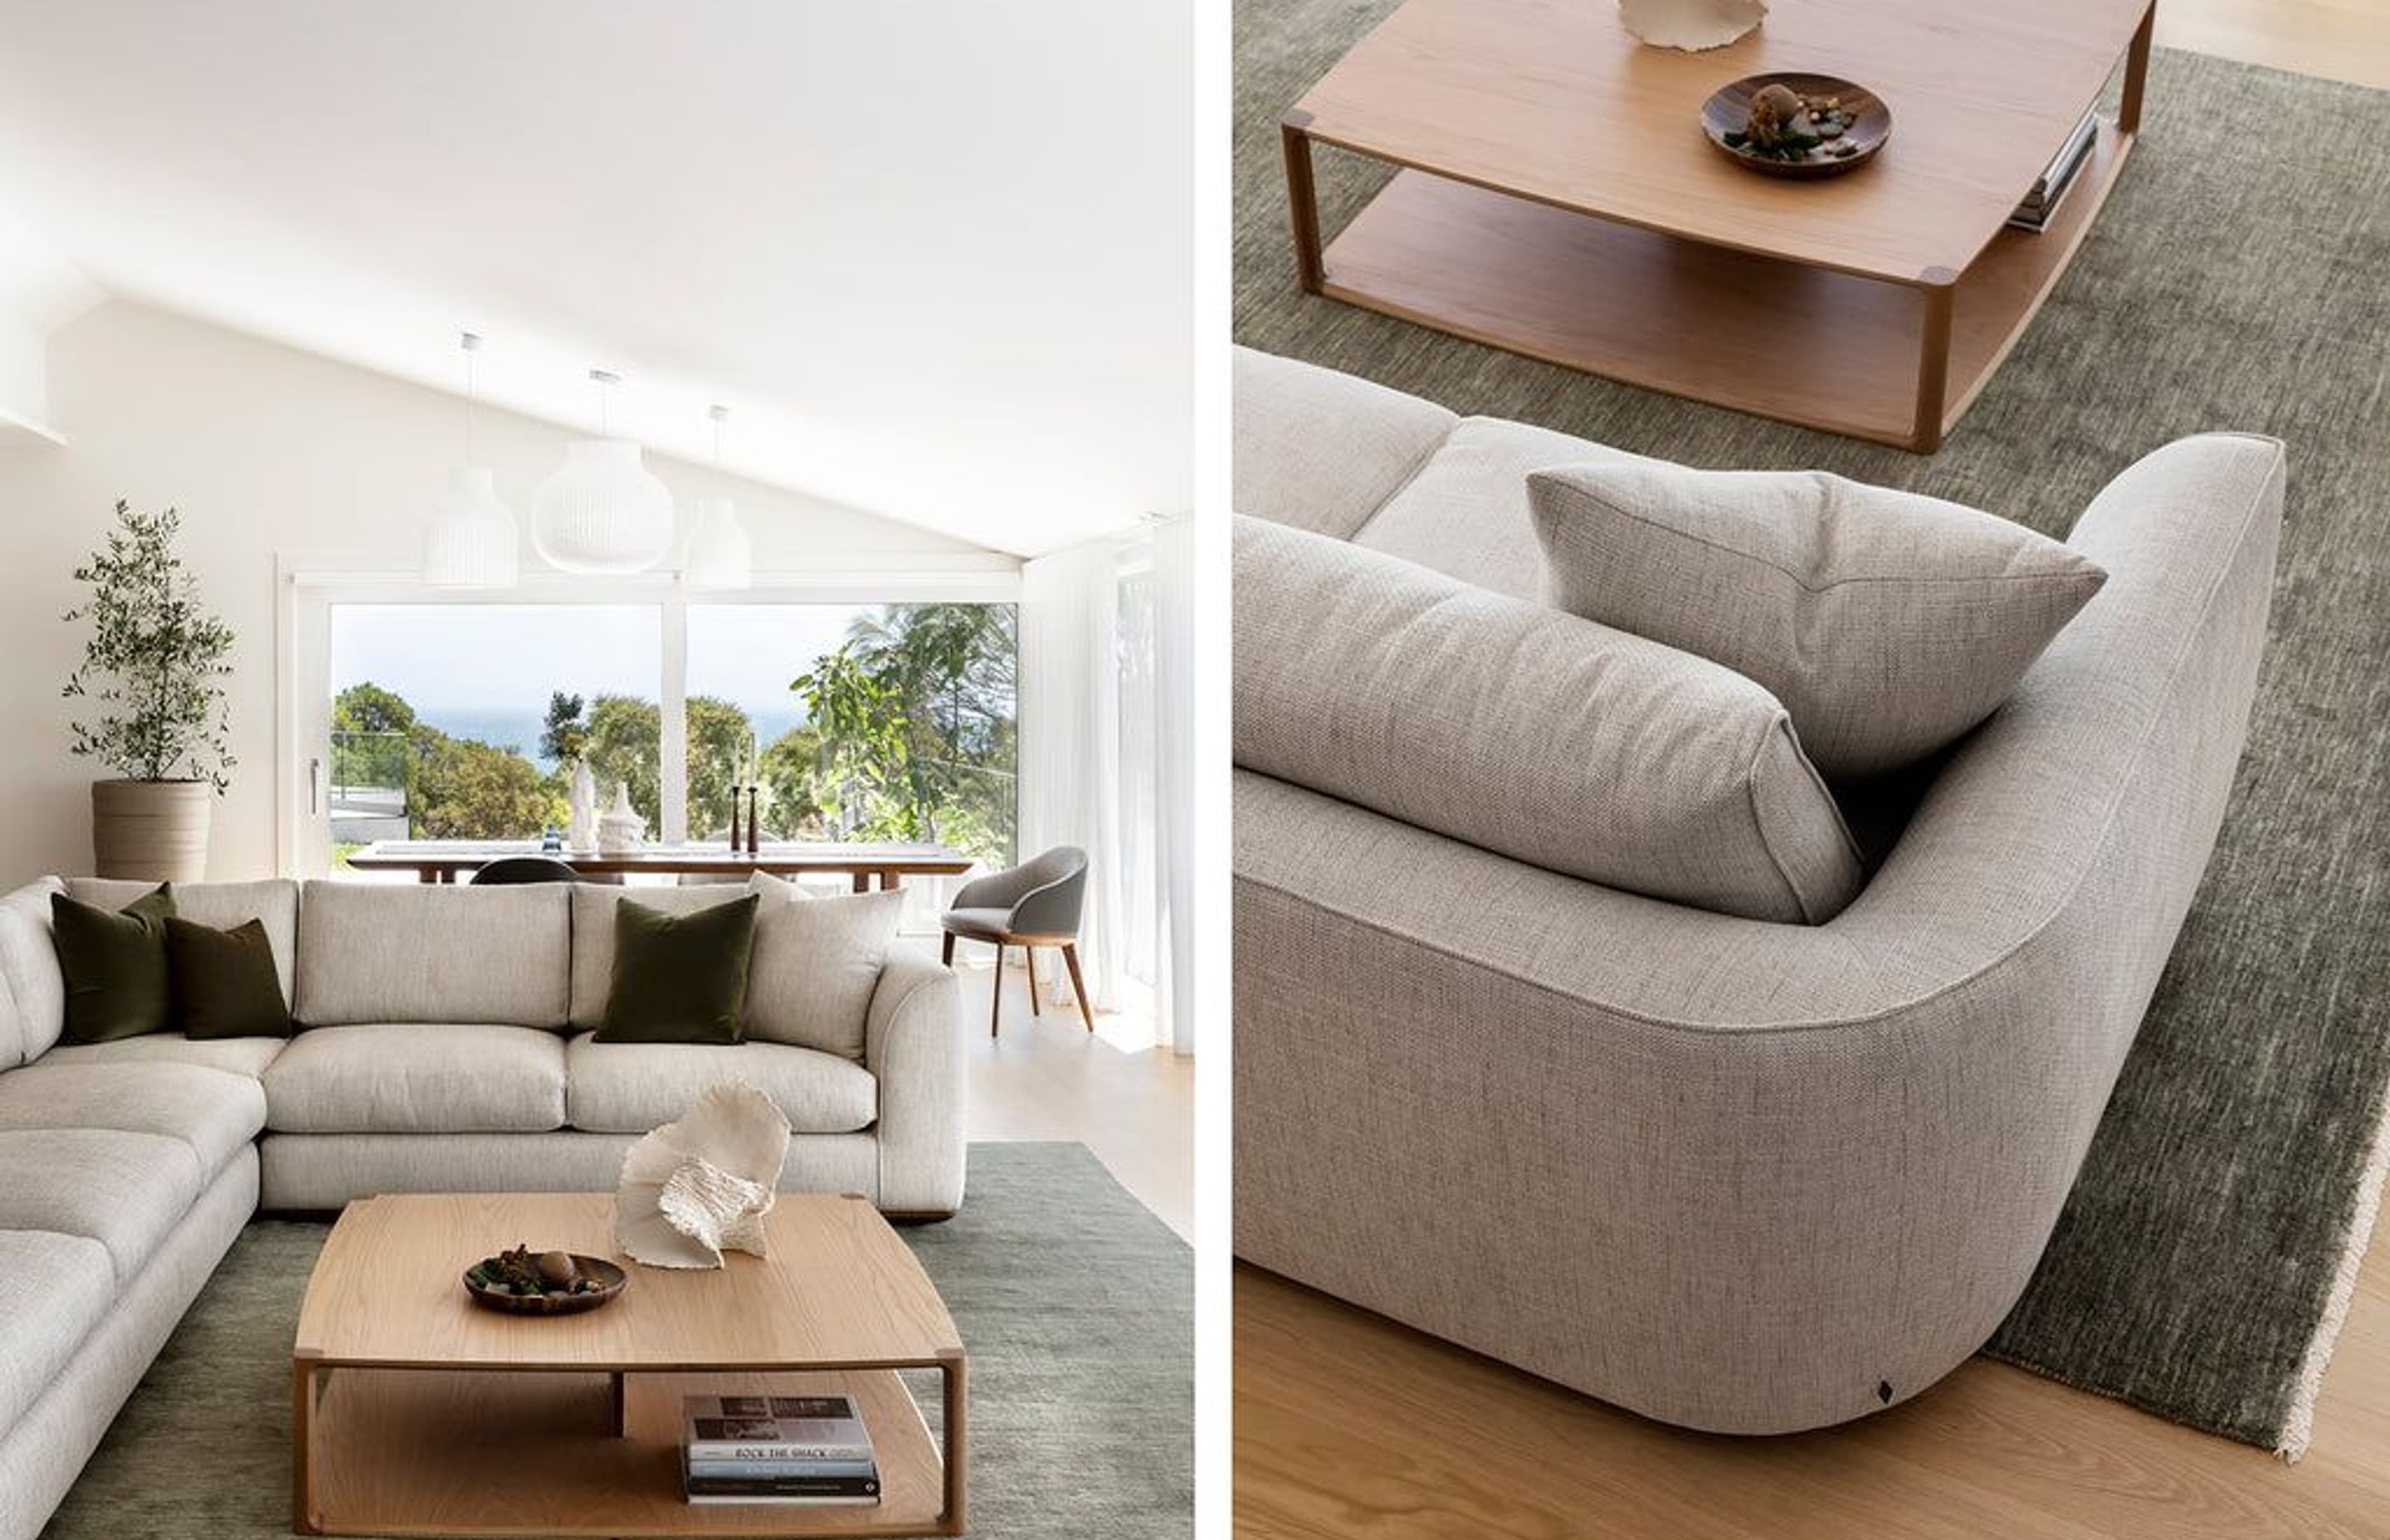 The Erskine Sofa by Kett featured in the Cape Schanck home, Photography: Martina Gemmola.